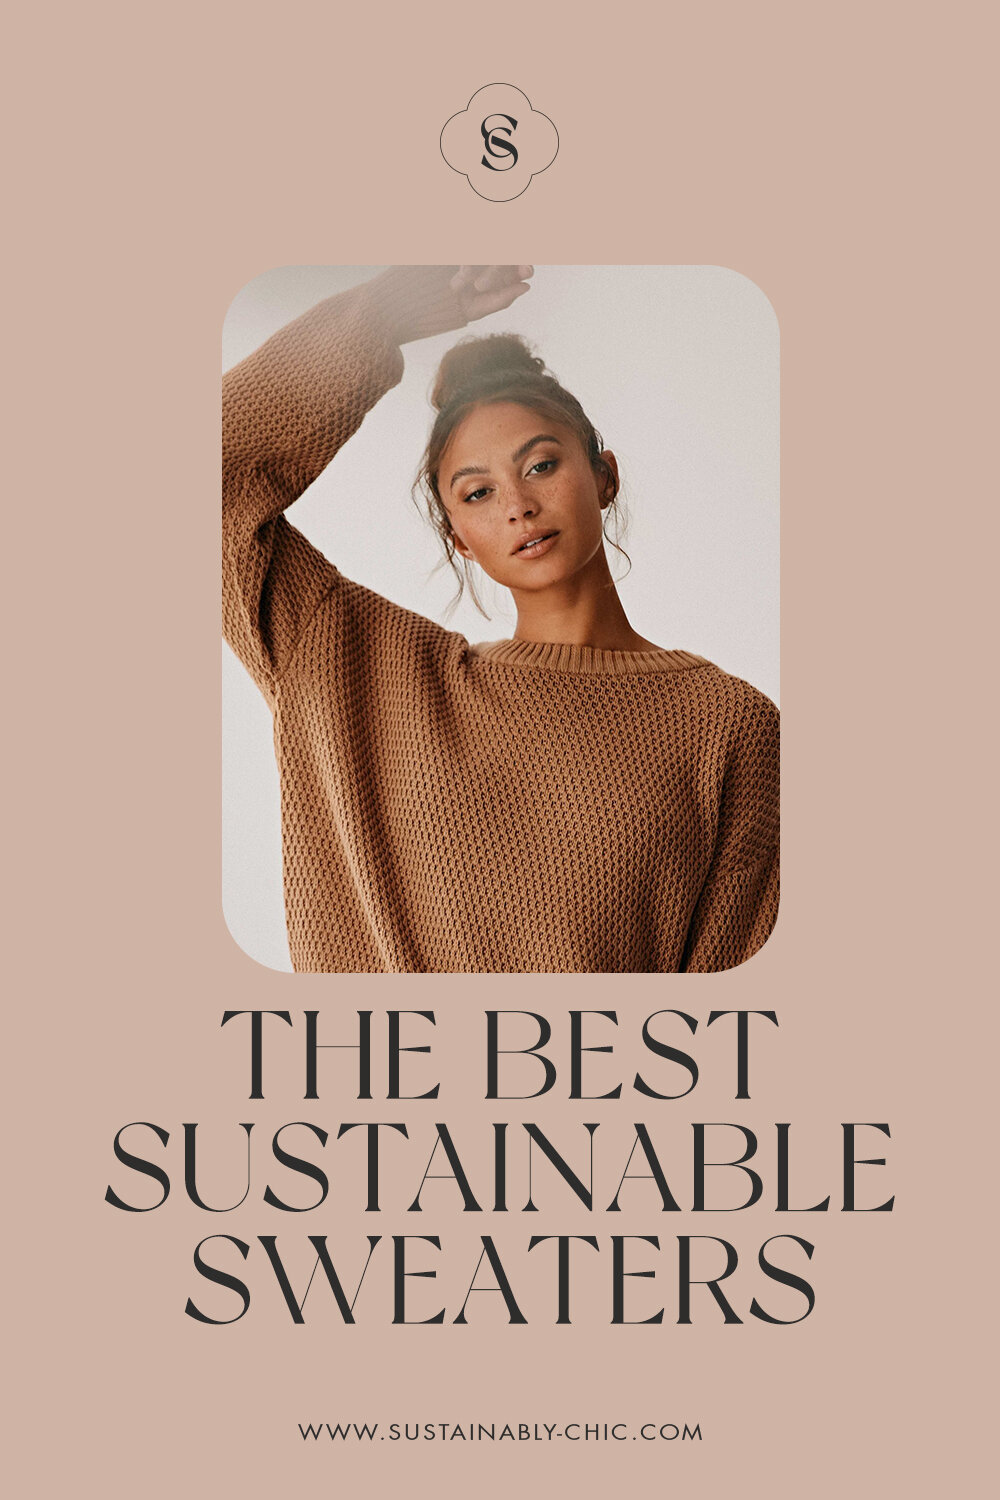 Sustainably Chic | Sustainable Fashion Blog | The Coziest Sustainable Sweaters.jpg